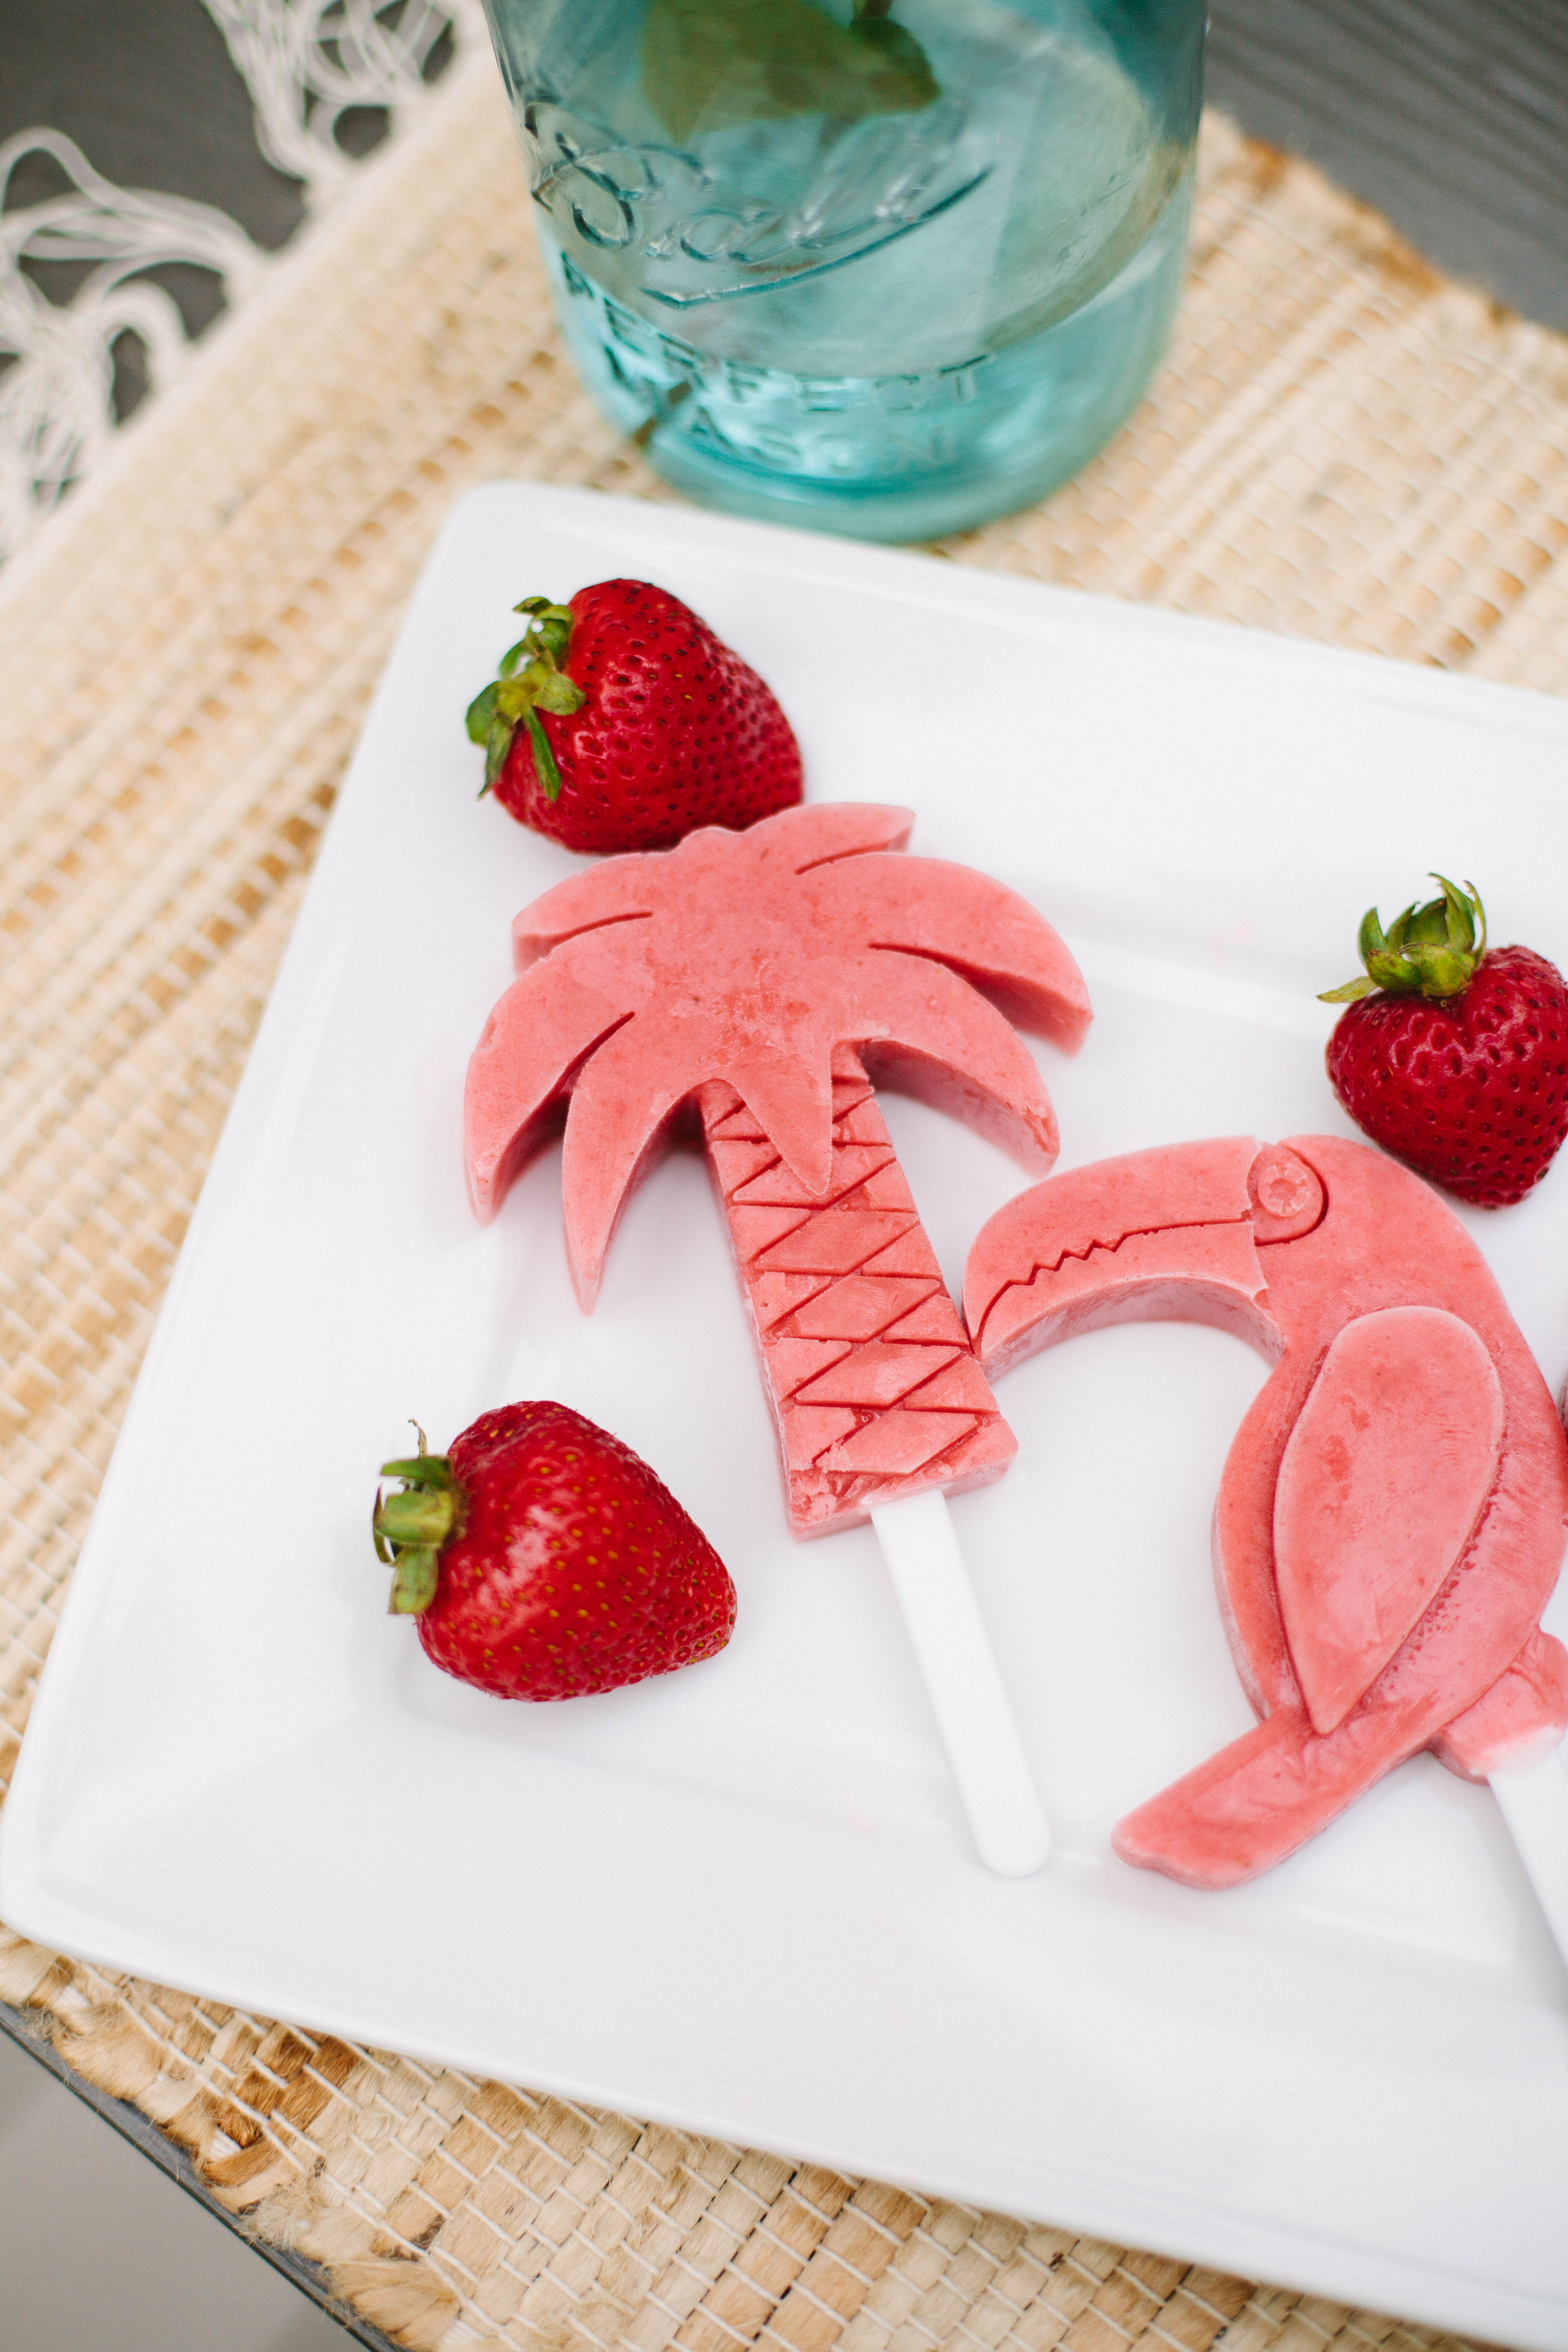 Looking for a healthy summer treat? These simple homemade strawberry banana popsicles will have your kids asking for more!